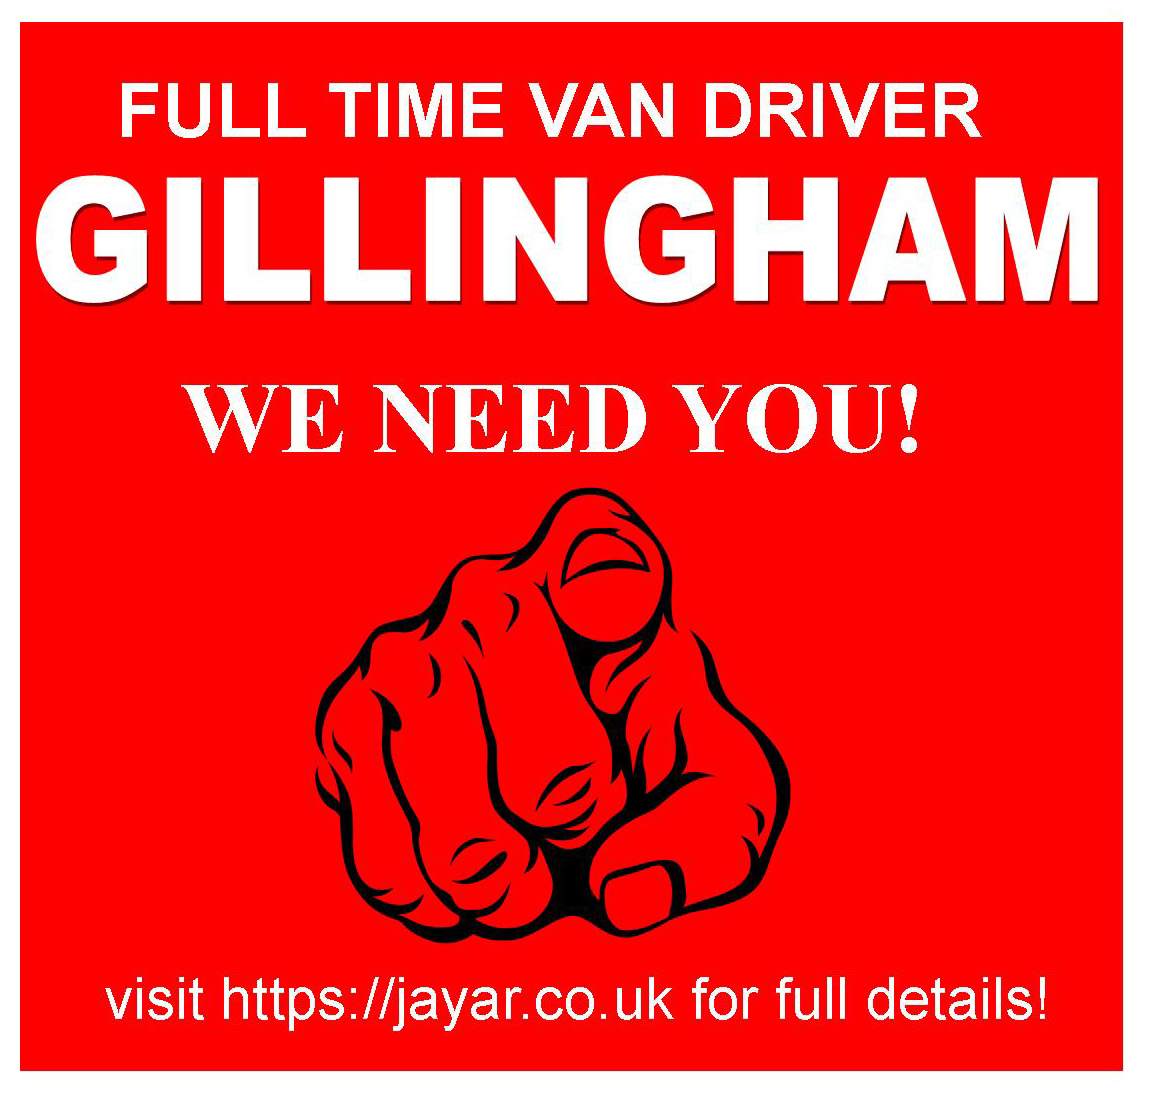 ***WE ARE HIRING***
Join our brilliant team!
We are looking for a full time Van Driver, for our busy #Gillingham Branch in #Kent
For a full job description & to apply, please visit
jayar.co.uk/job-openings/?…
Good Luck! #jobsinkent #kentjobs